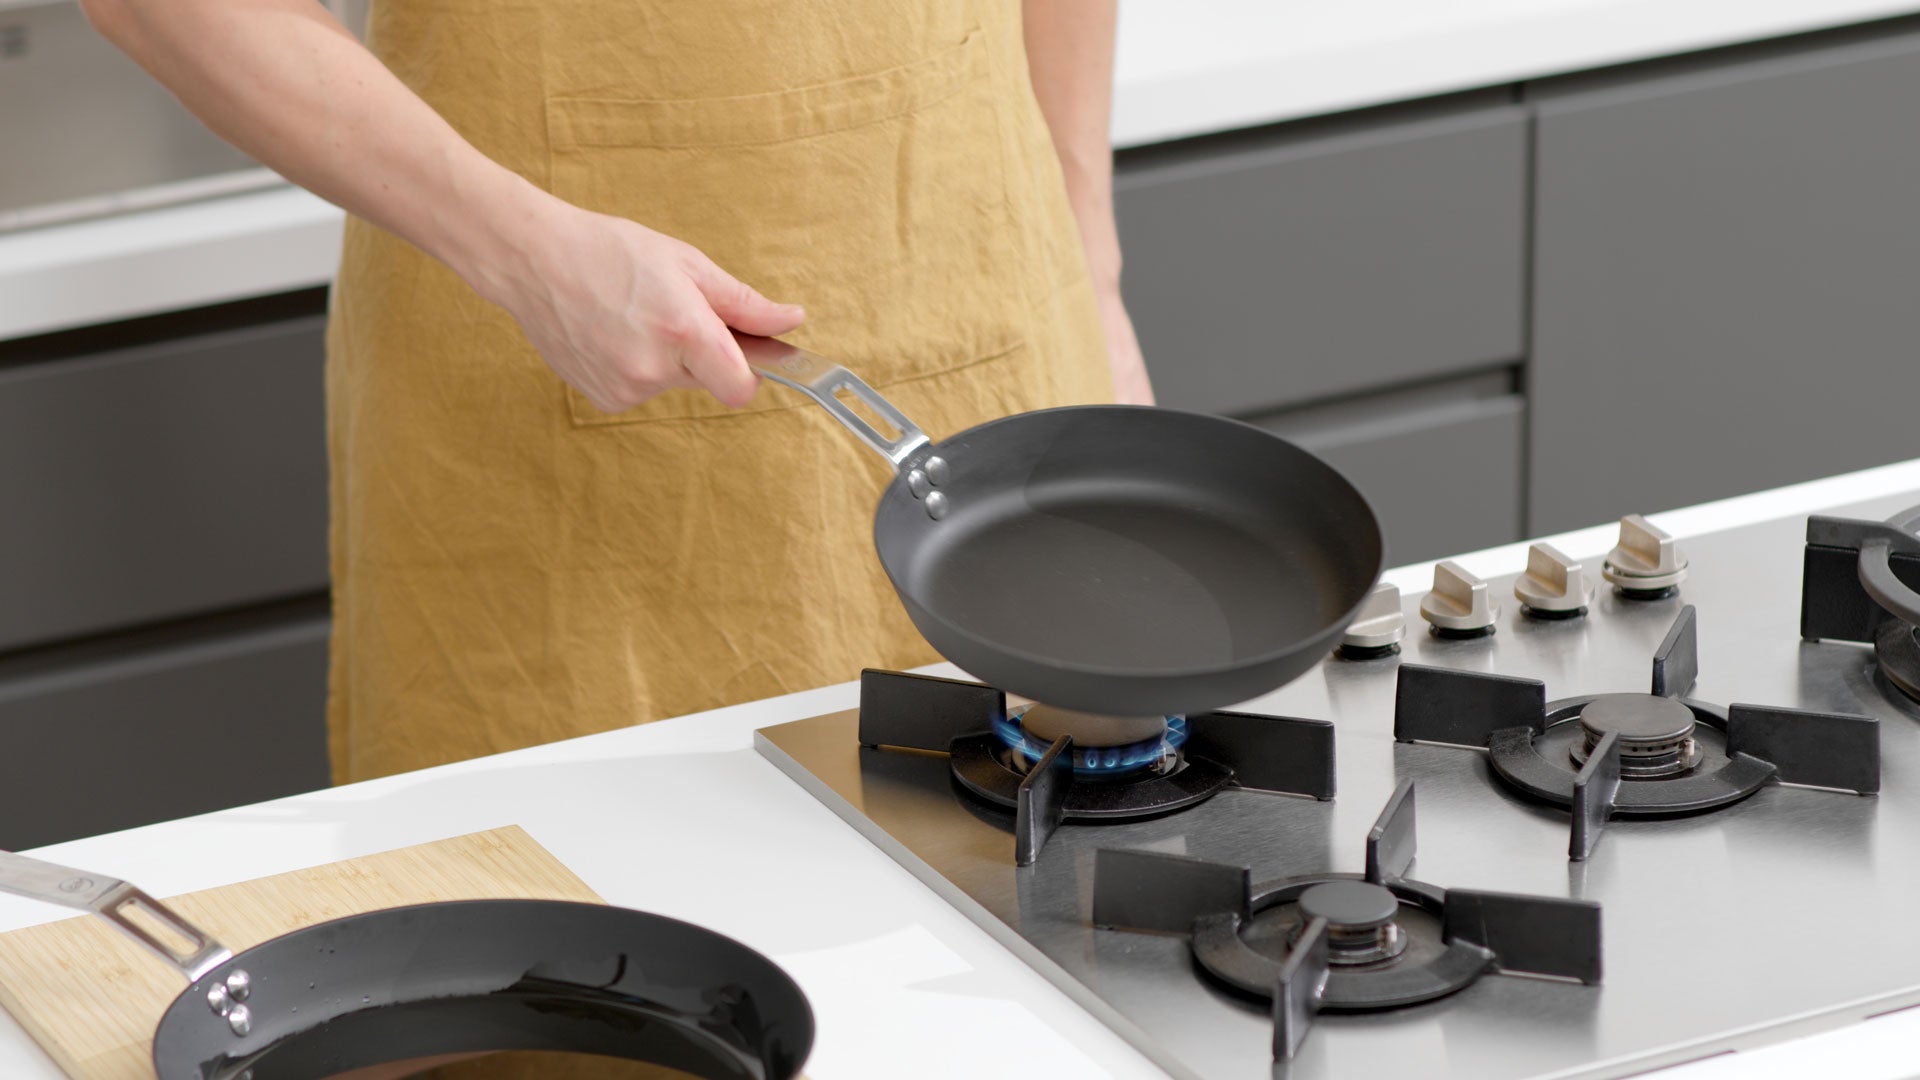 How to Season a Carbon Steel Pan